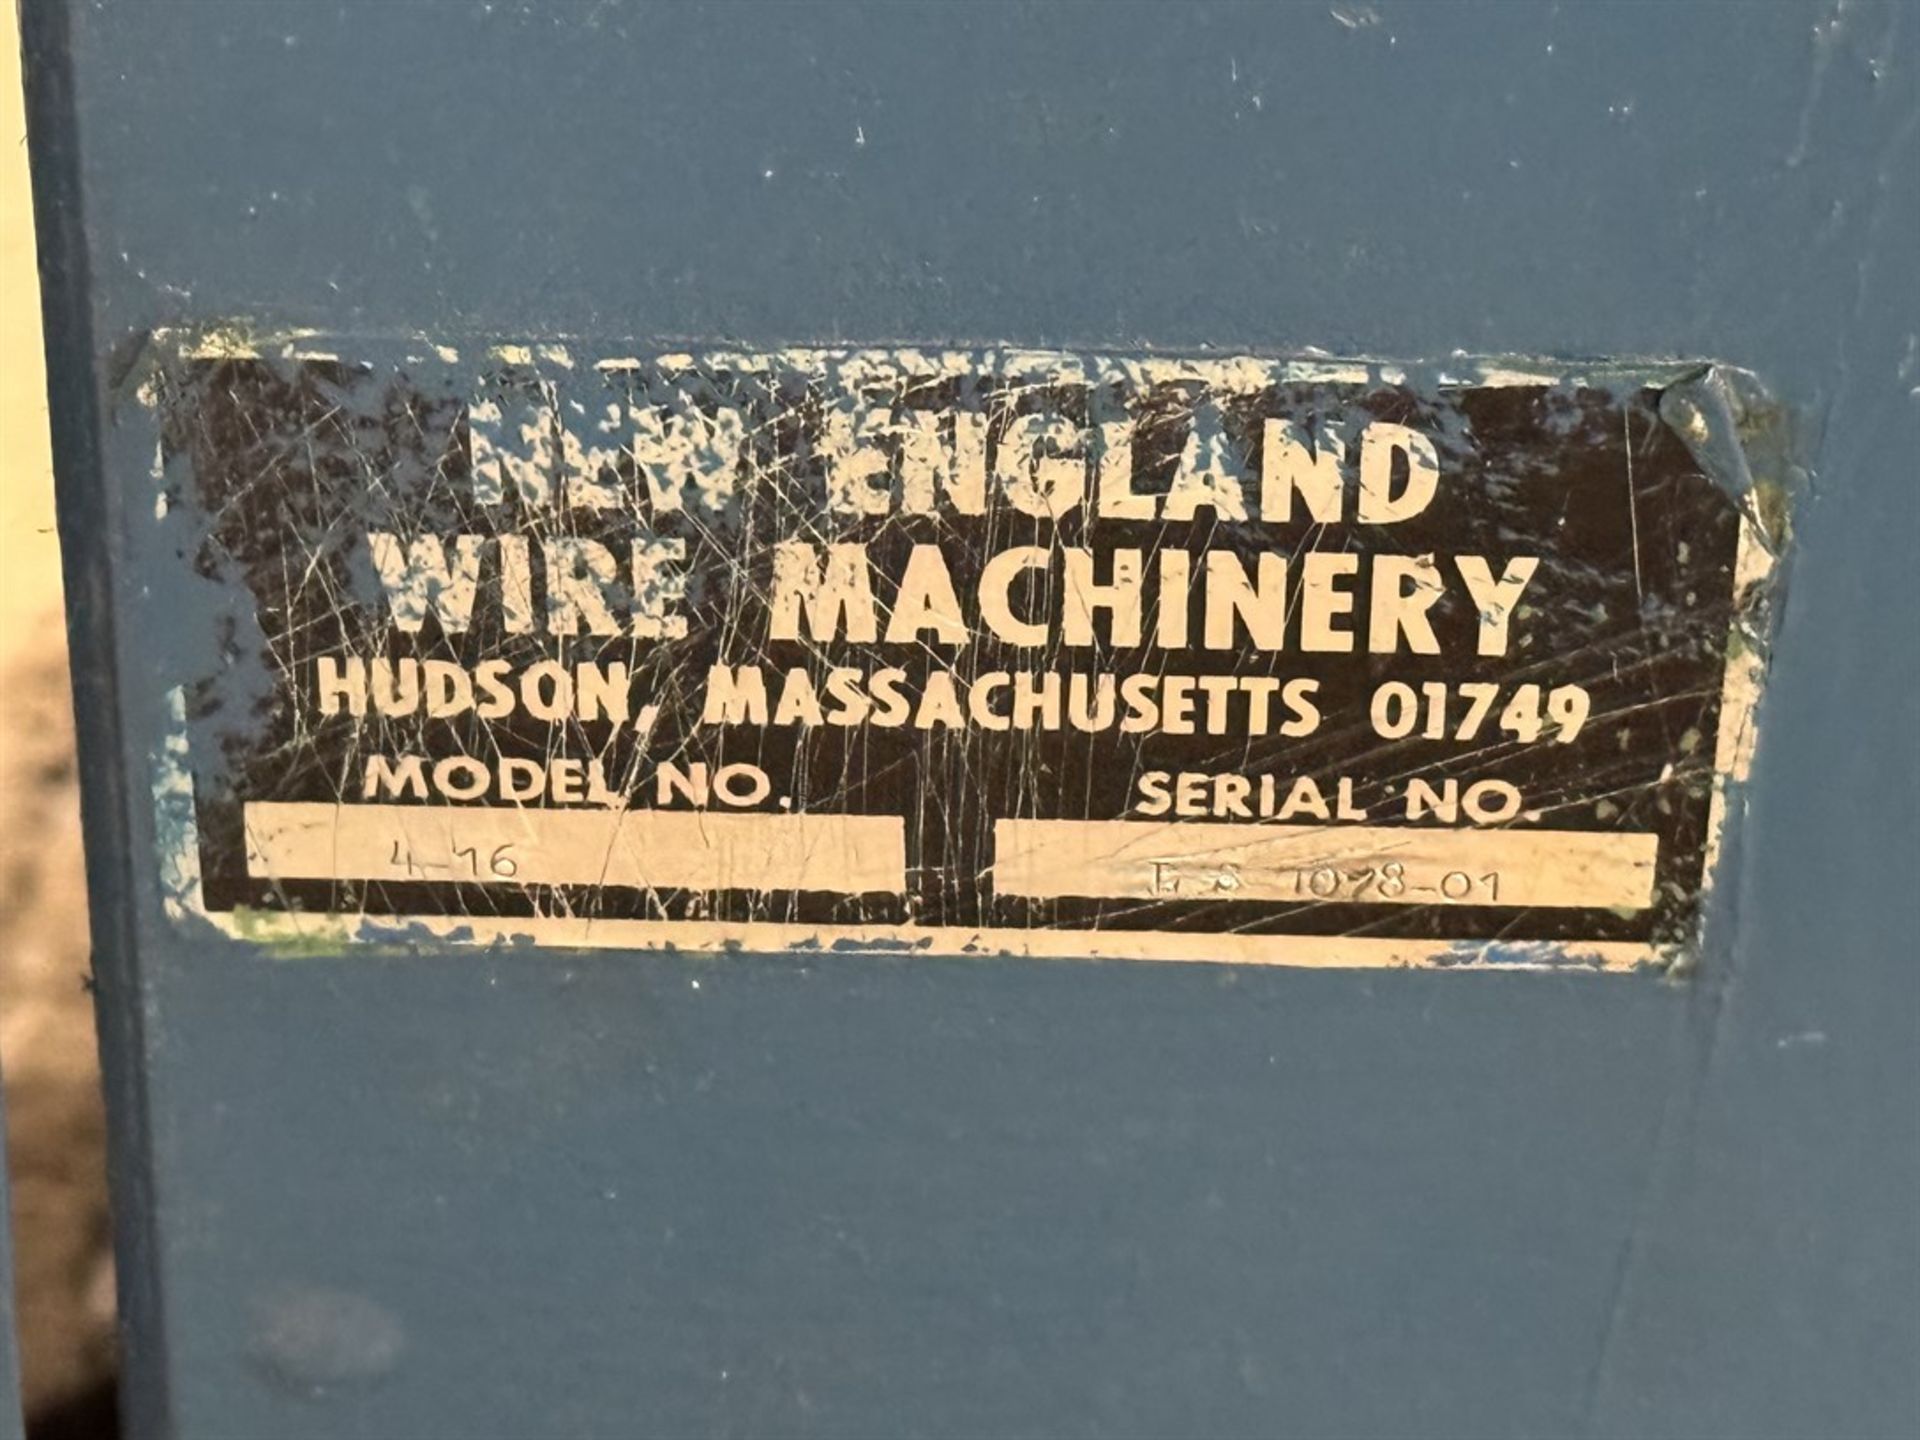 NEW ENGLAND WIRE MACHINERY 4-16 16” Quadder, s/n LS1078-01, w/ Take-up - Image 8 of 8